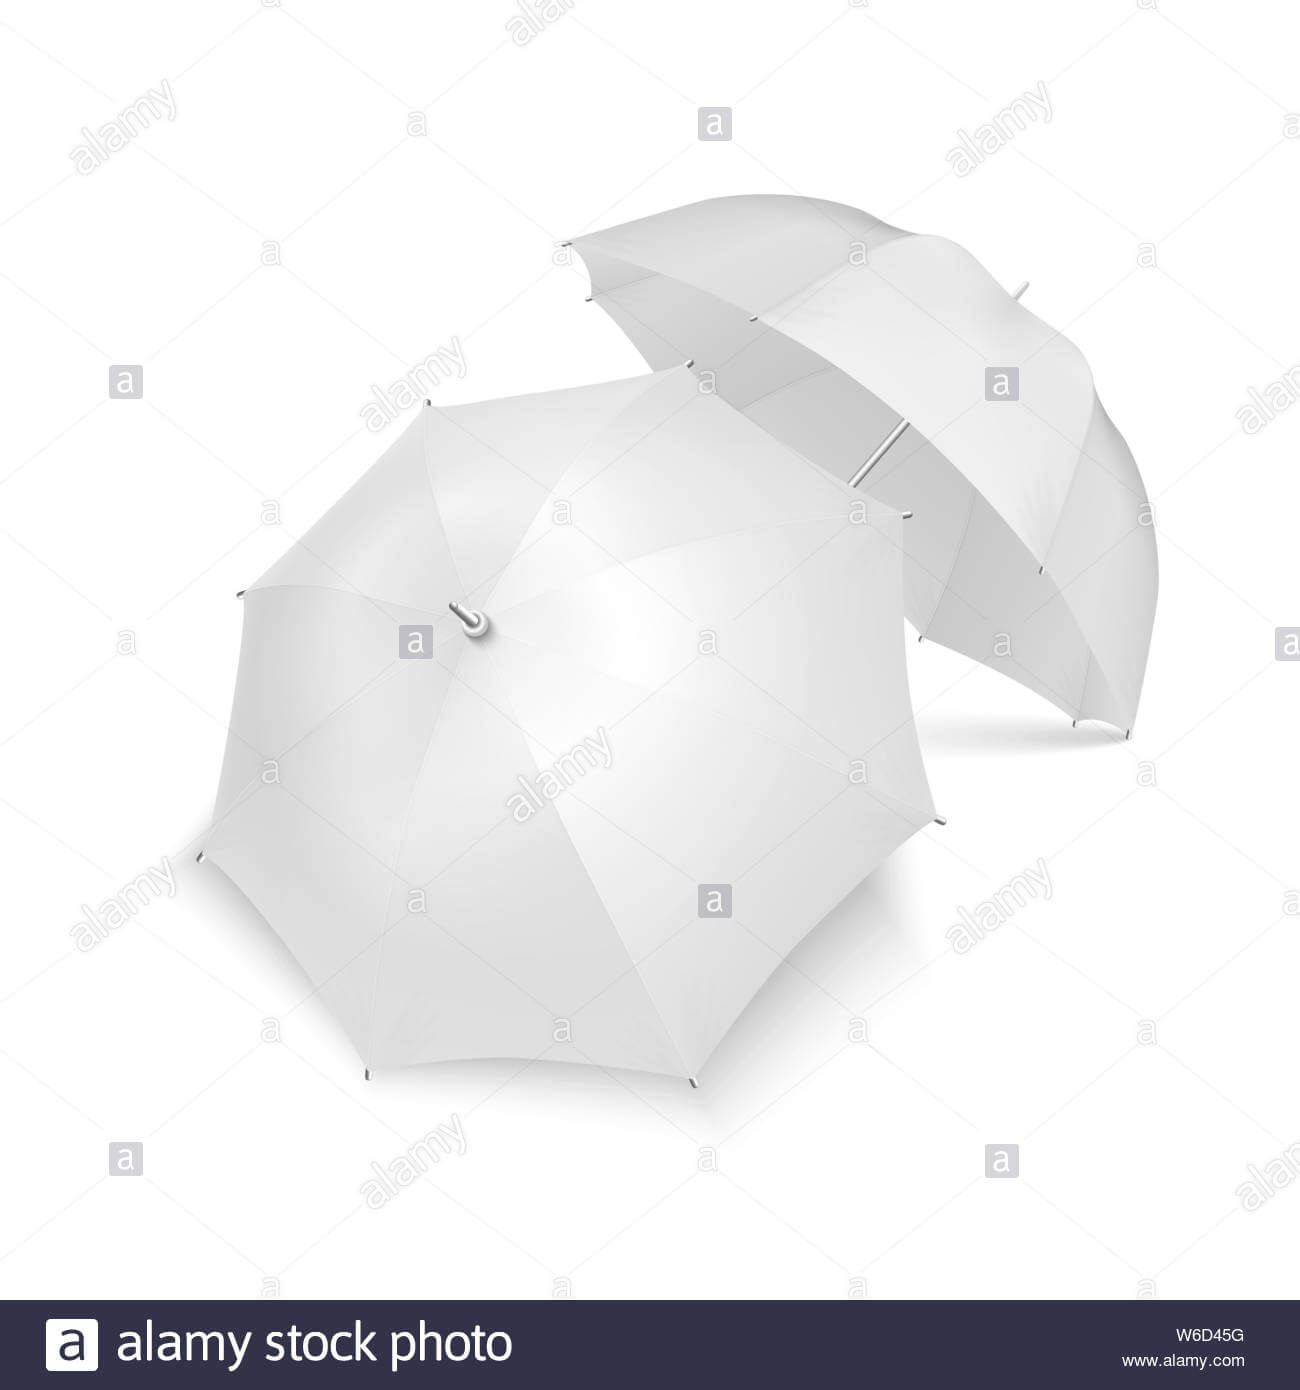 Vector 3D Realistic Render White Blank Umbrella Icon Set With Blank Umbrella Template